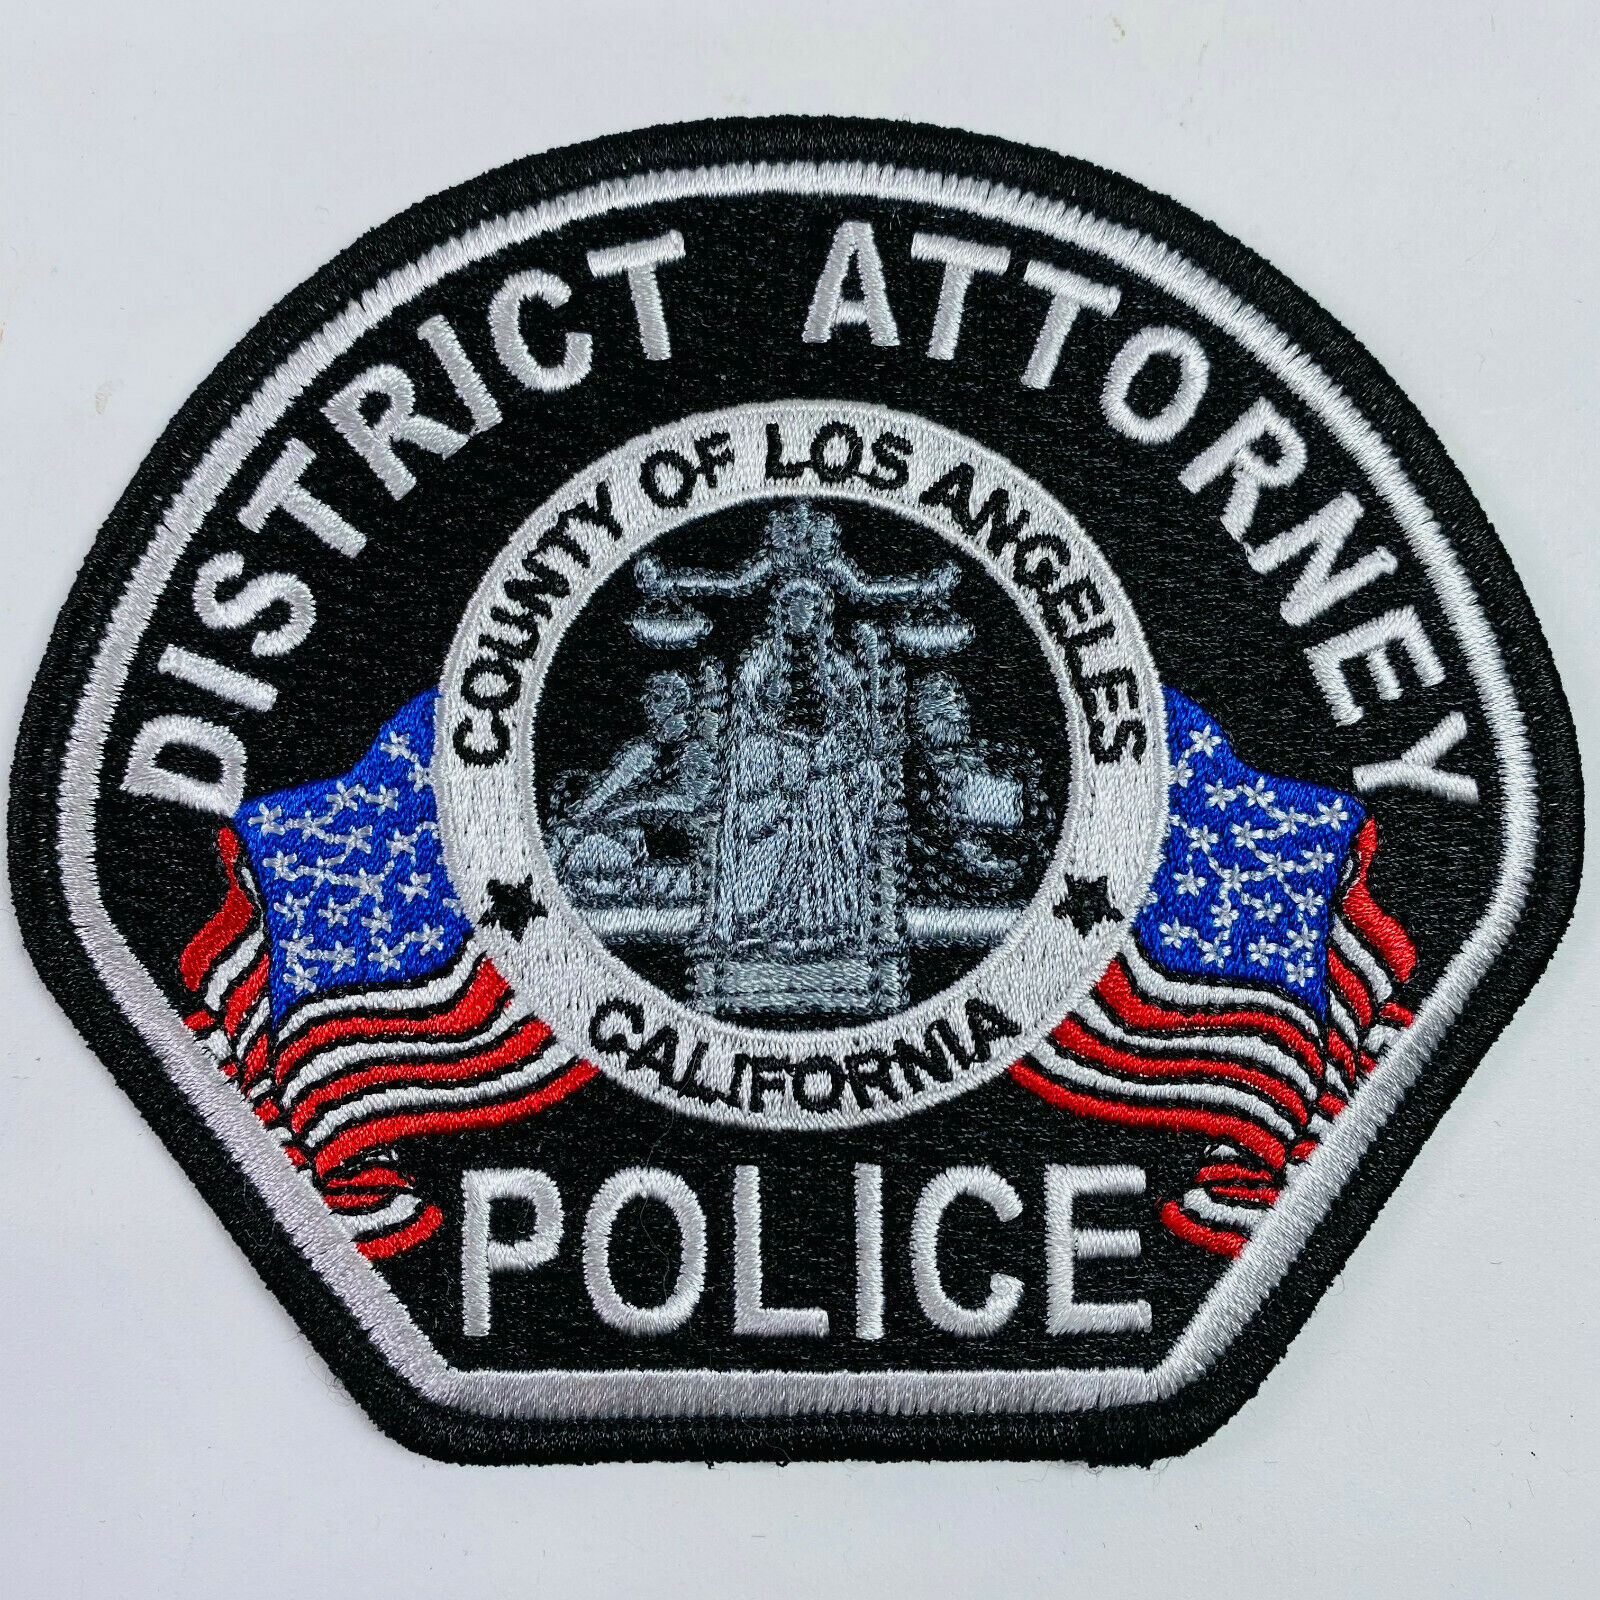 District Attorney Police California Ca Patch (b1)